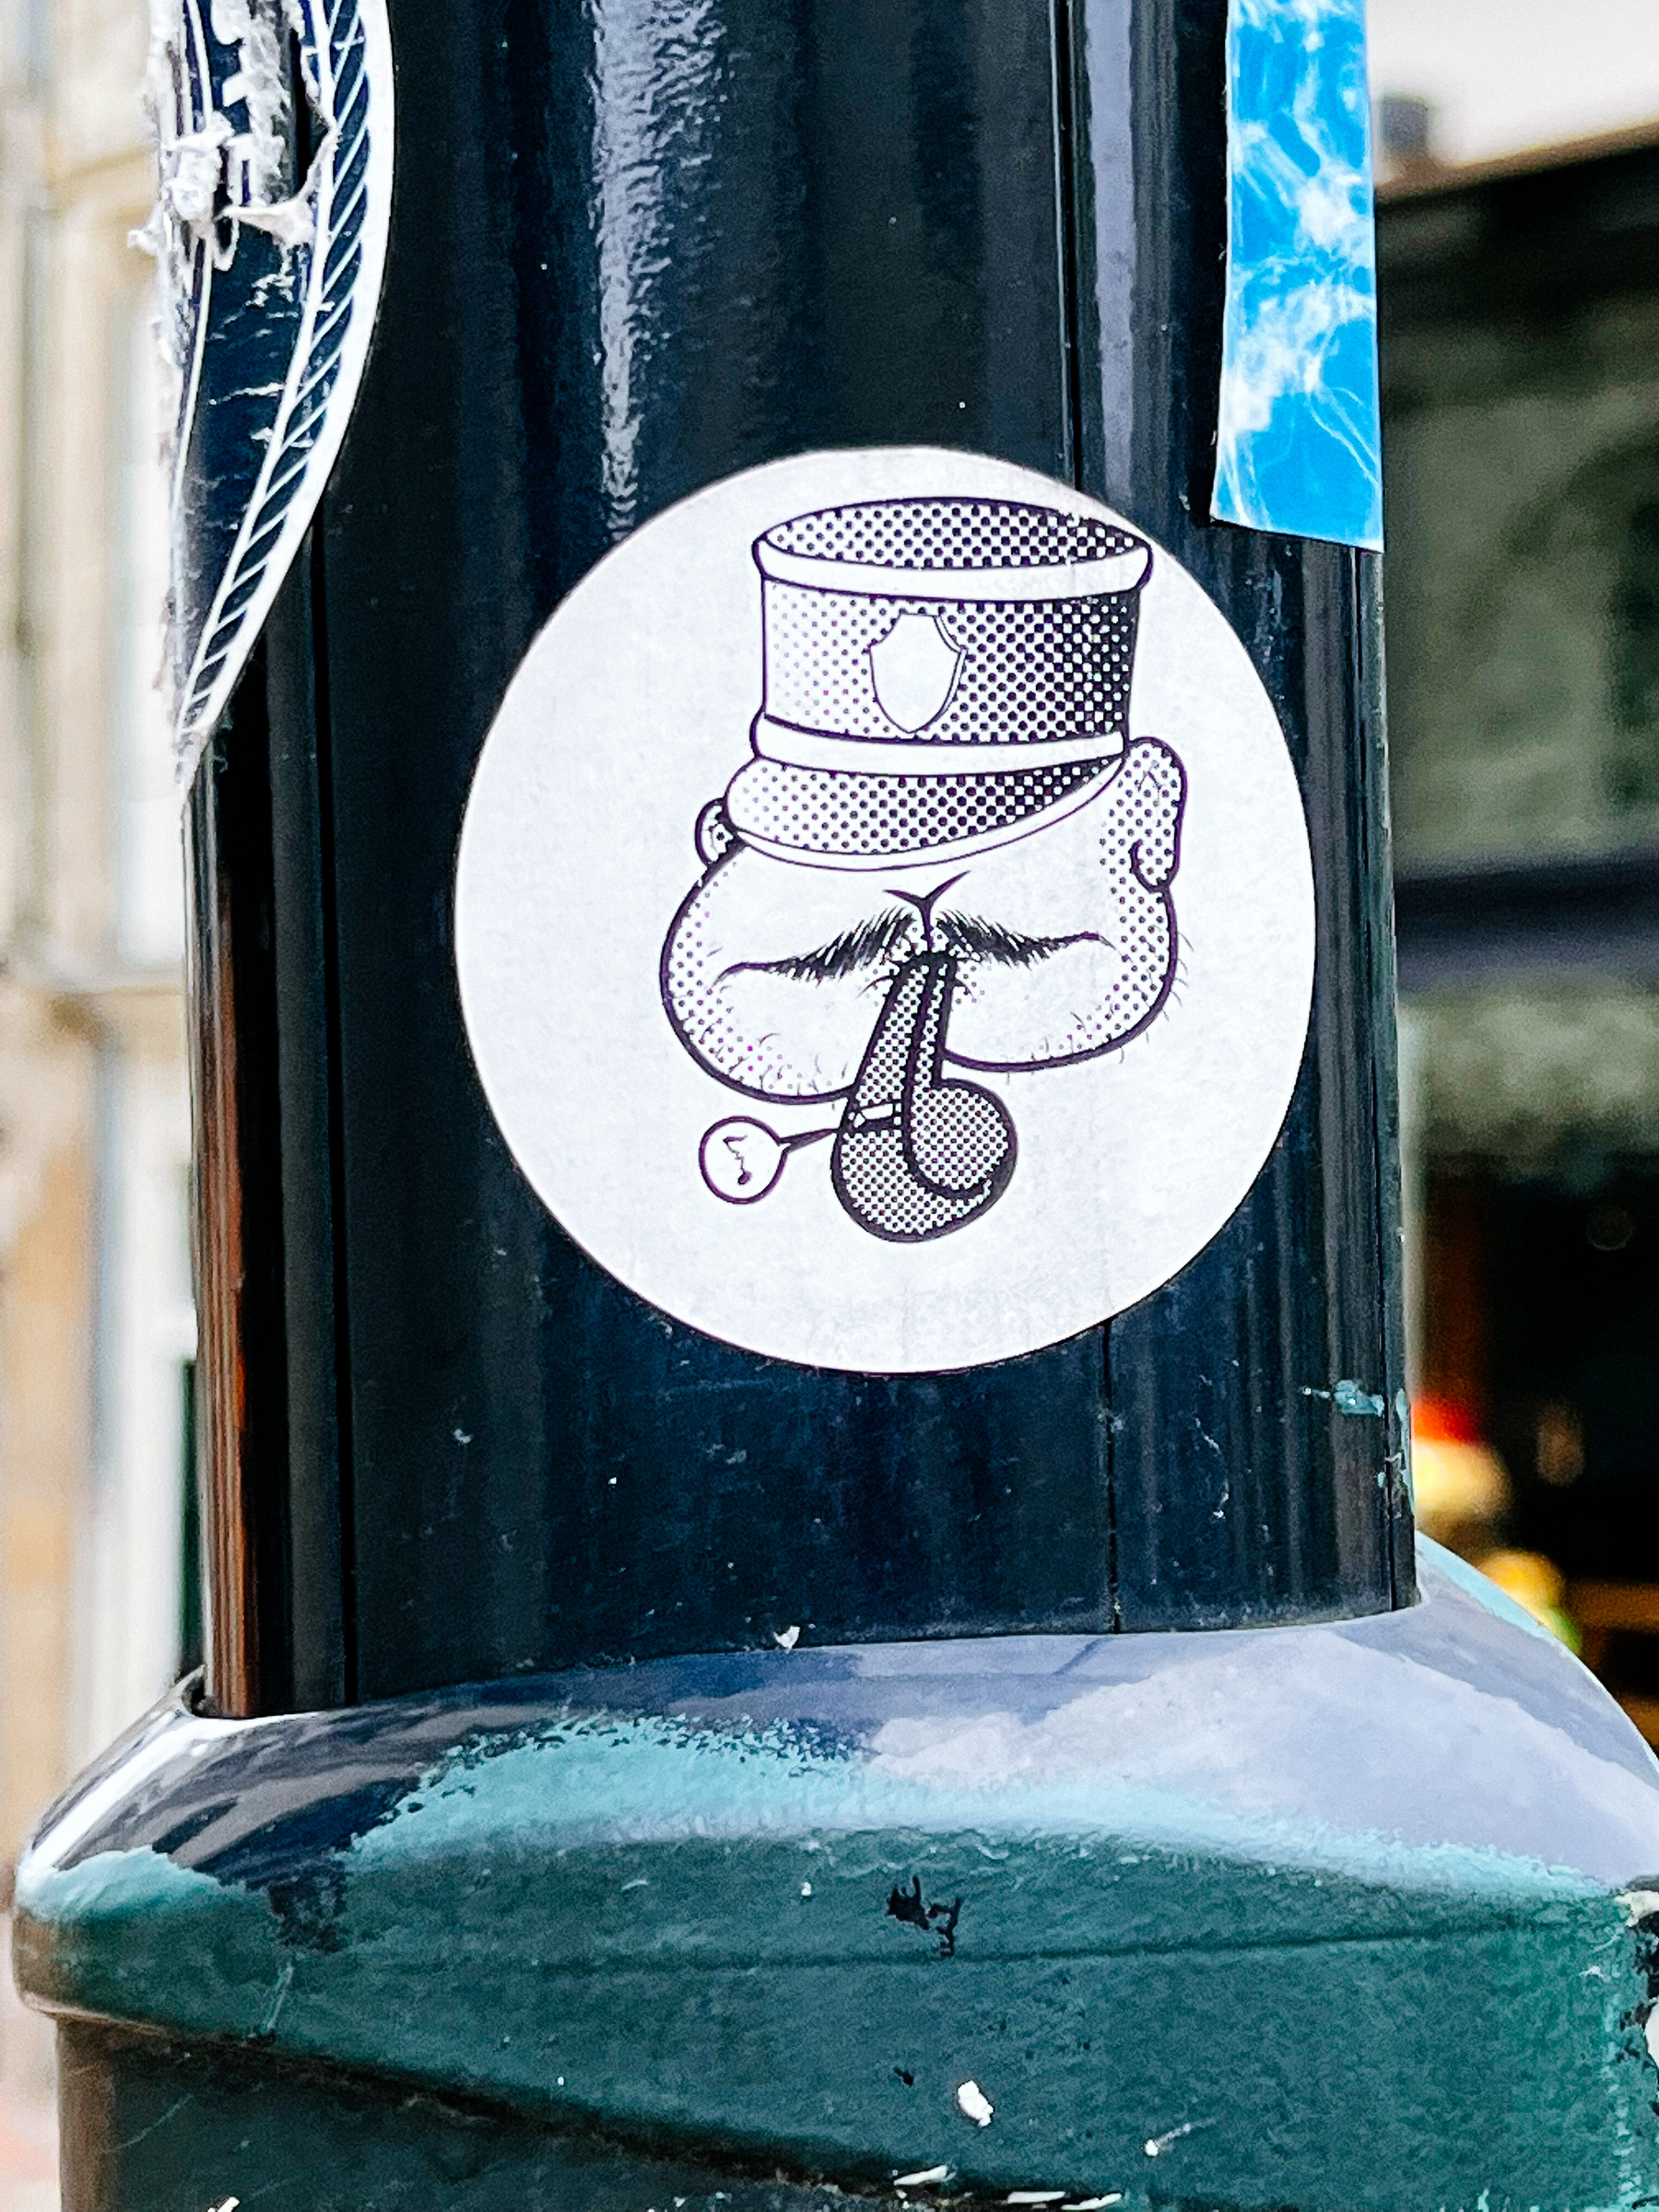 Sticker of what looks like a butt with a policemen’s cap, and a whistle in his “mouth”. 